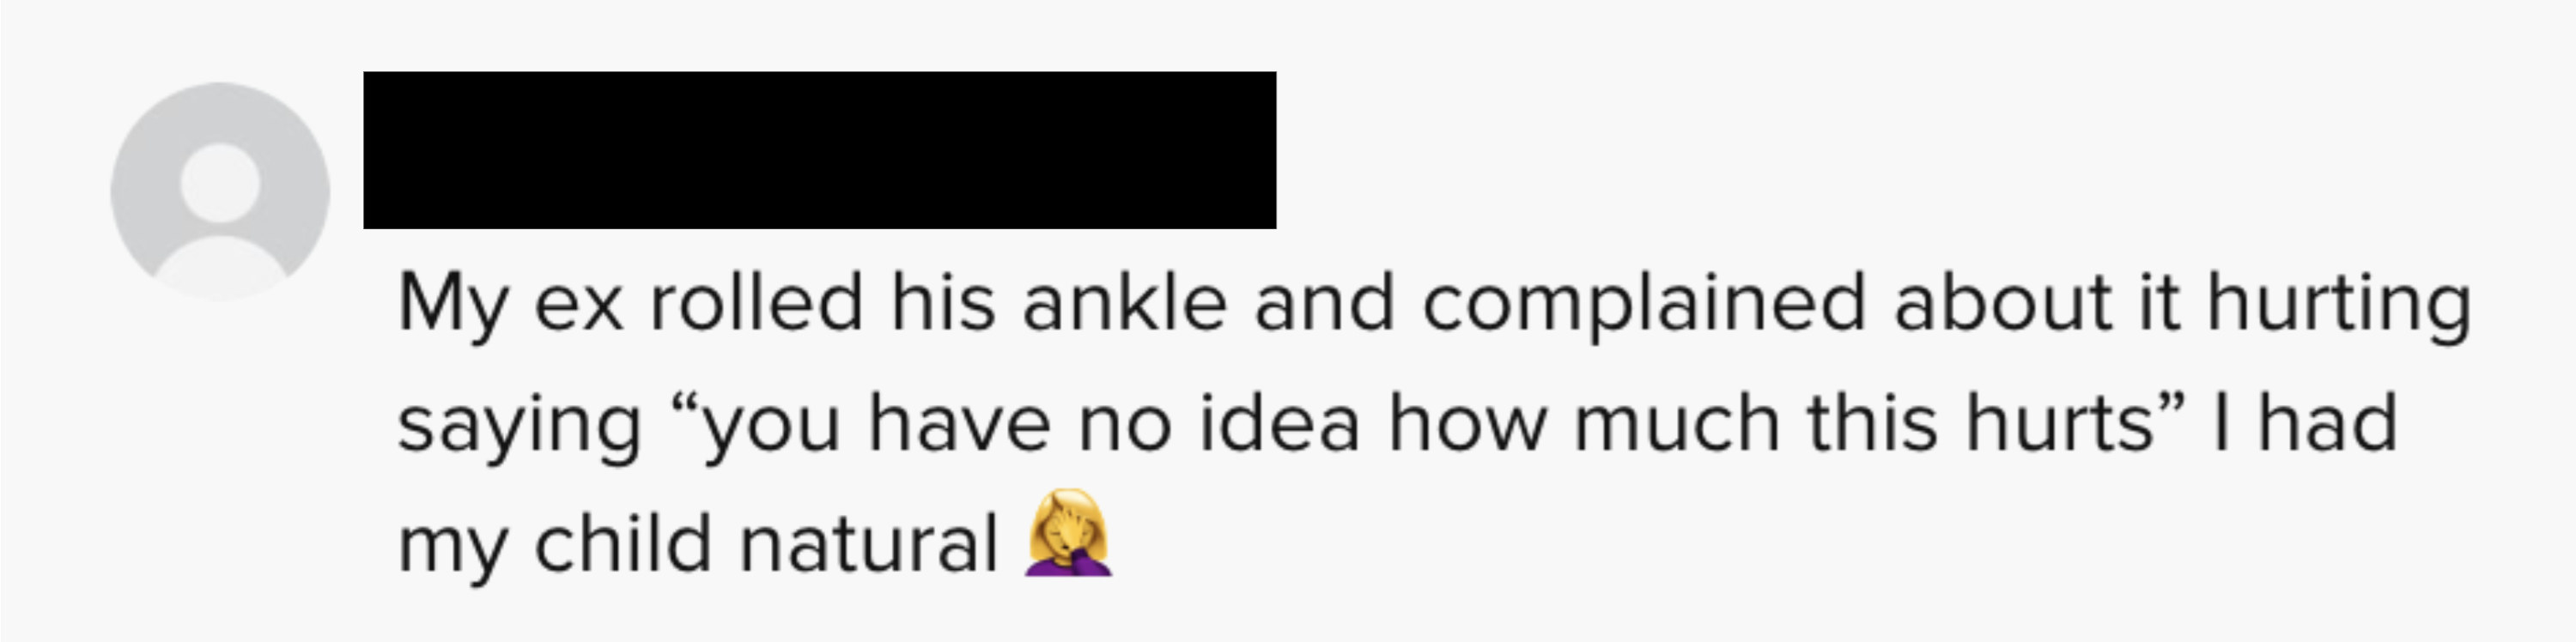 &quot;My ex rolled his ankle and complained about it hurting, saying &#x27;you have no idea how much this hurts.&#x27; I had my child naturally&quot;